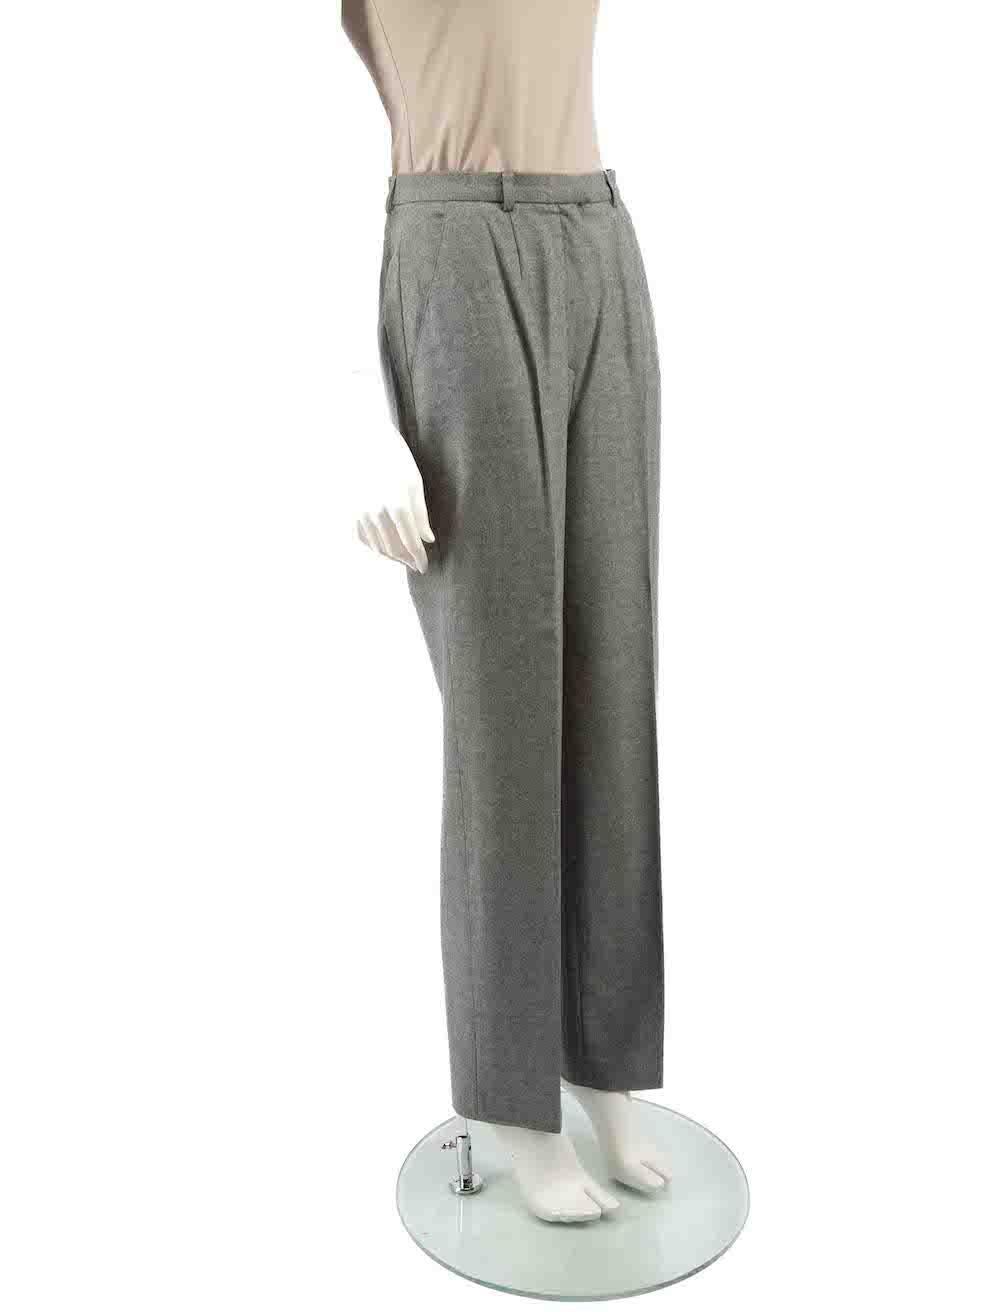 CONDITION is Very good. Hardly any visible wear to trousers is evident on this used Escada designer resale item.
 
 
 
 Details
 
 
 Grey
 
 Wool
 
 Trousers
 
 Straight leg
 
 2x Front pockets
 
 Fly zip, hook and button fastening
 
 
 
 
 
 Made